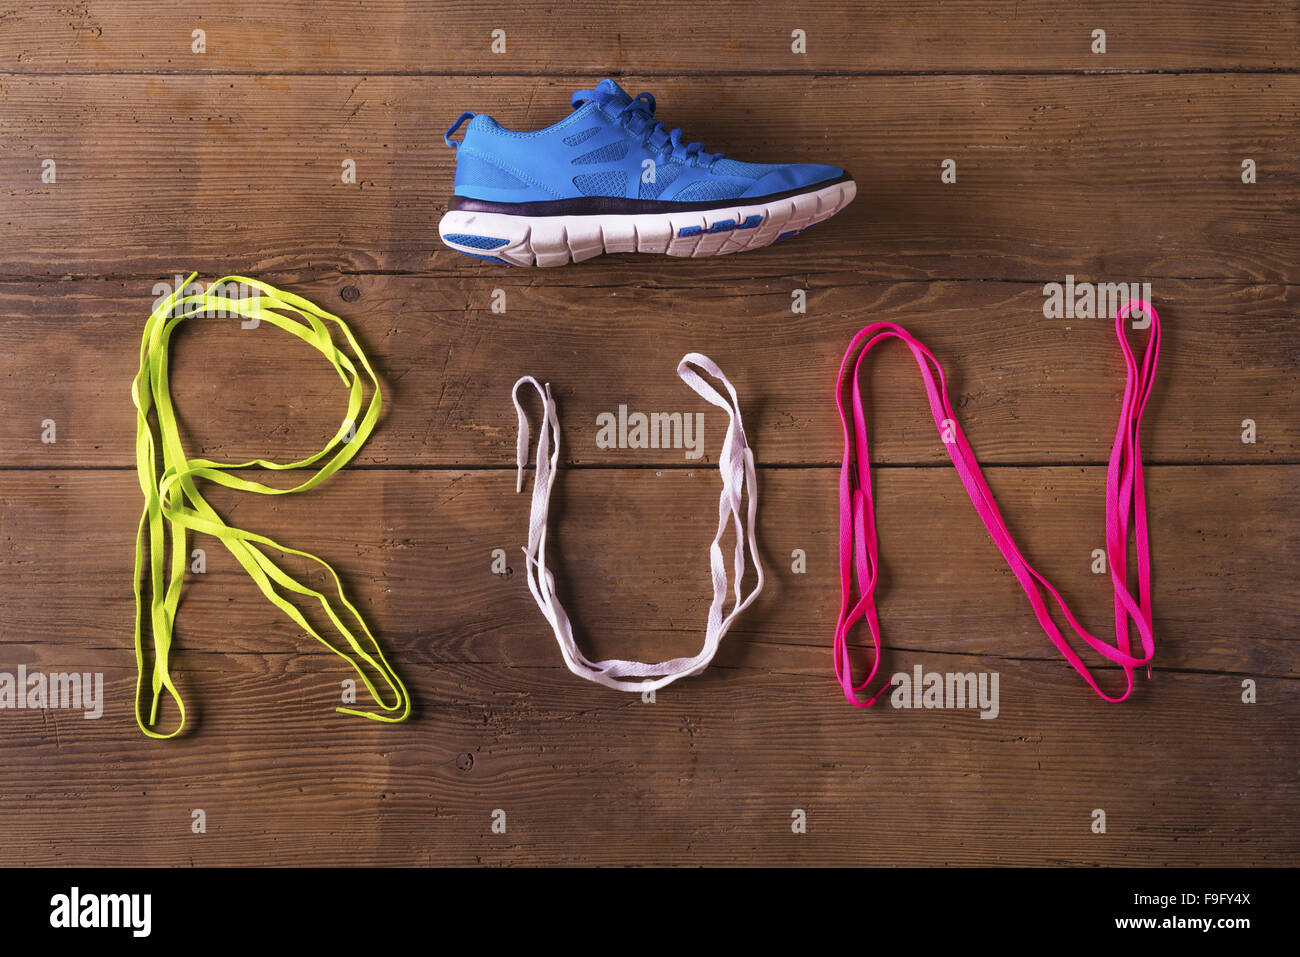 Running shoe and shoelaces run sign on a wooden floor background Stock Photo